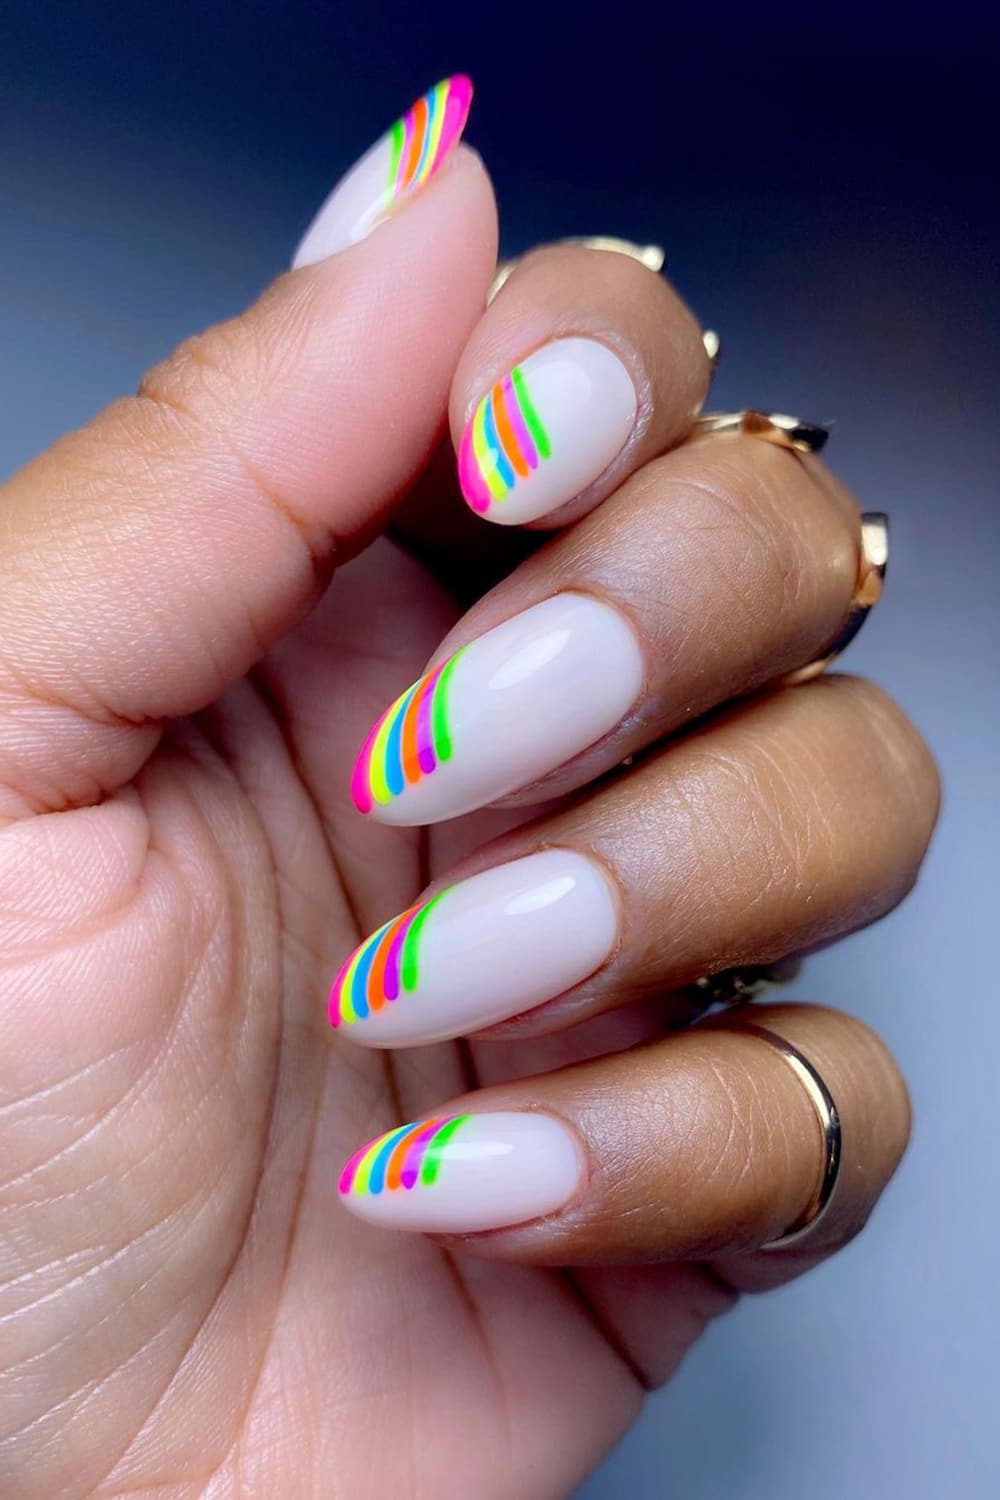 White nails with creative rainbow tips